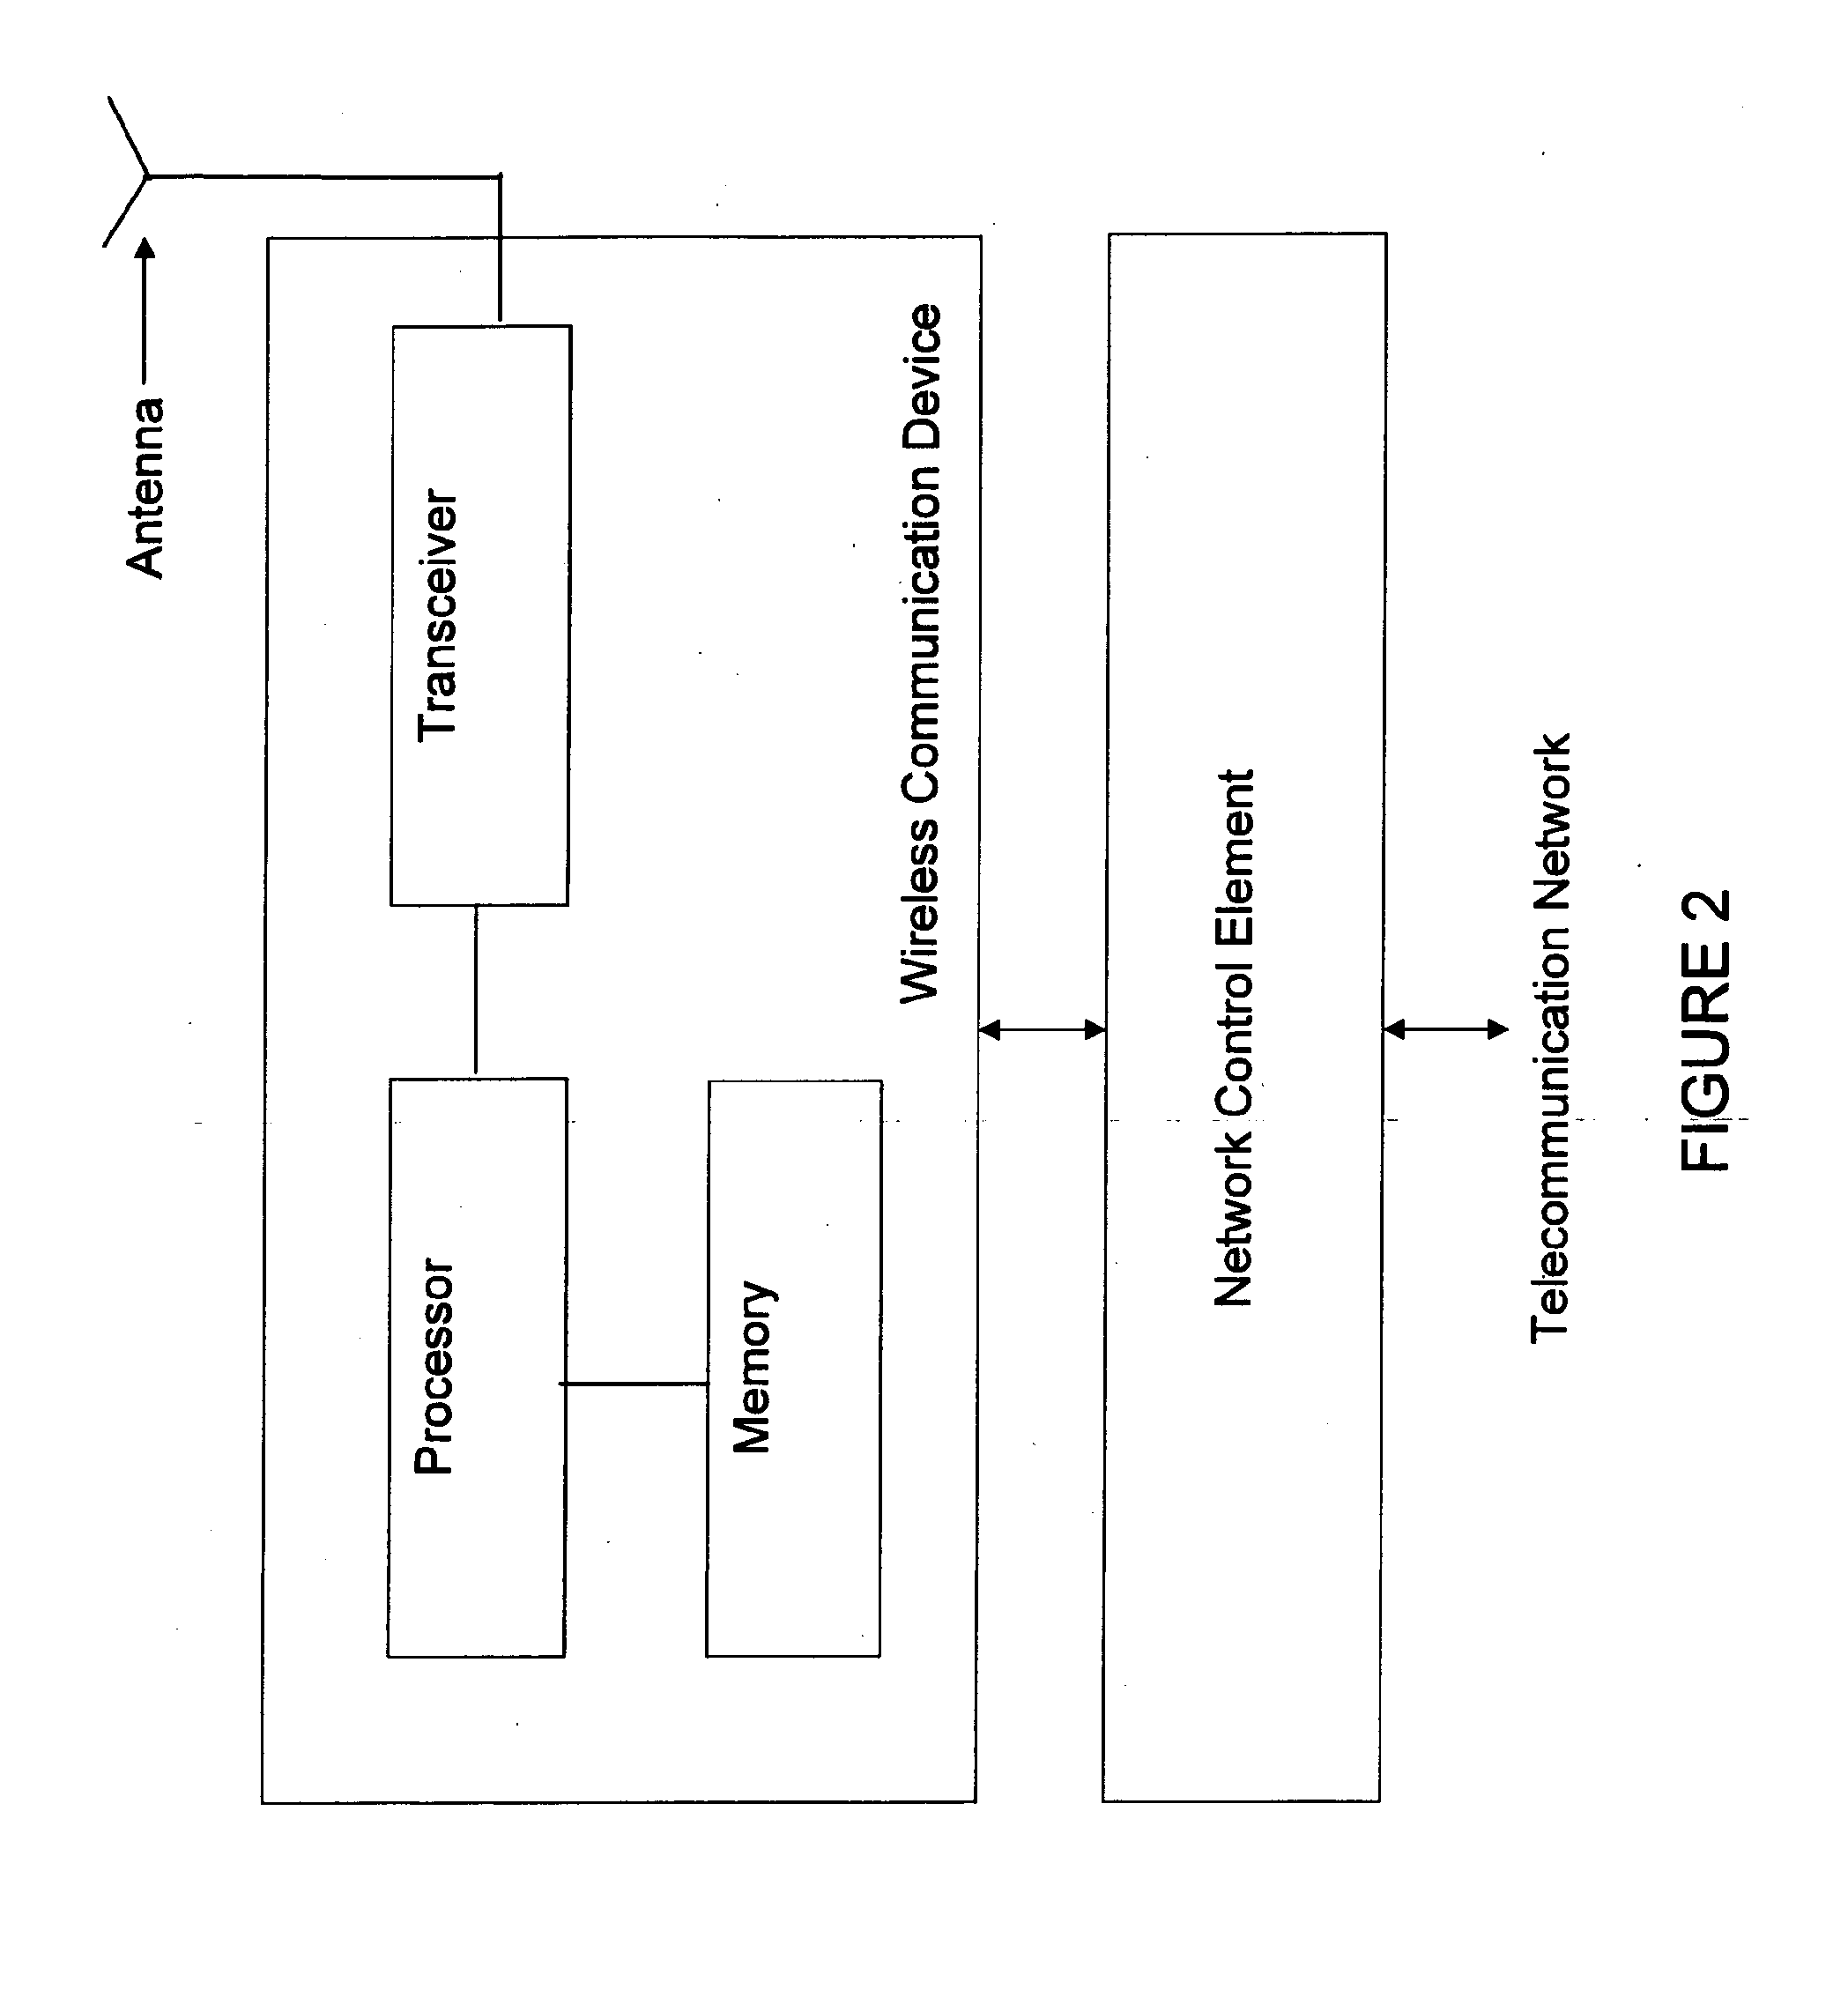 Dynamic allocation of subframe scheduling for time divison duplex operation in a packet-based wireless communication system